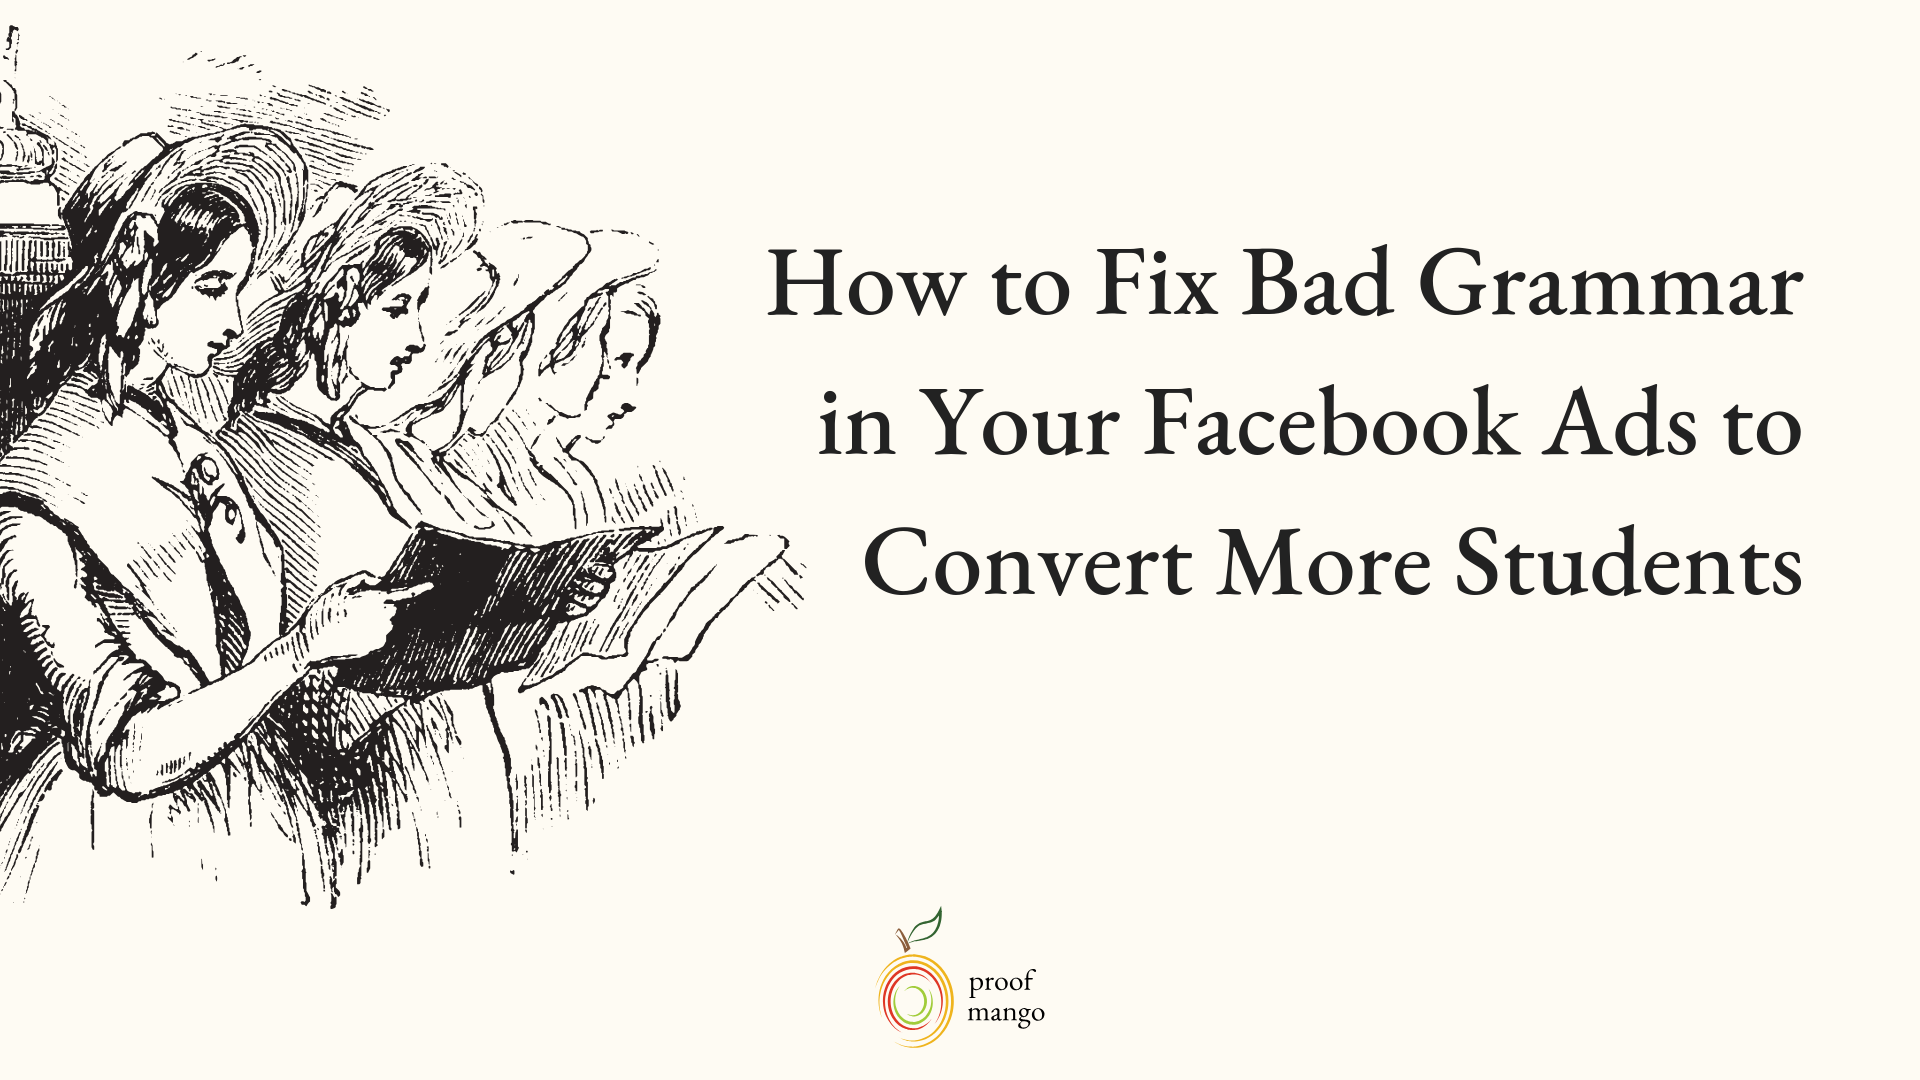 How to Fix Bad Grammar in Your Facebook Ads to Convert More Students 